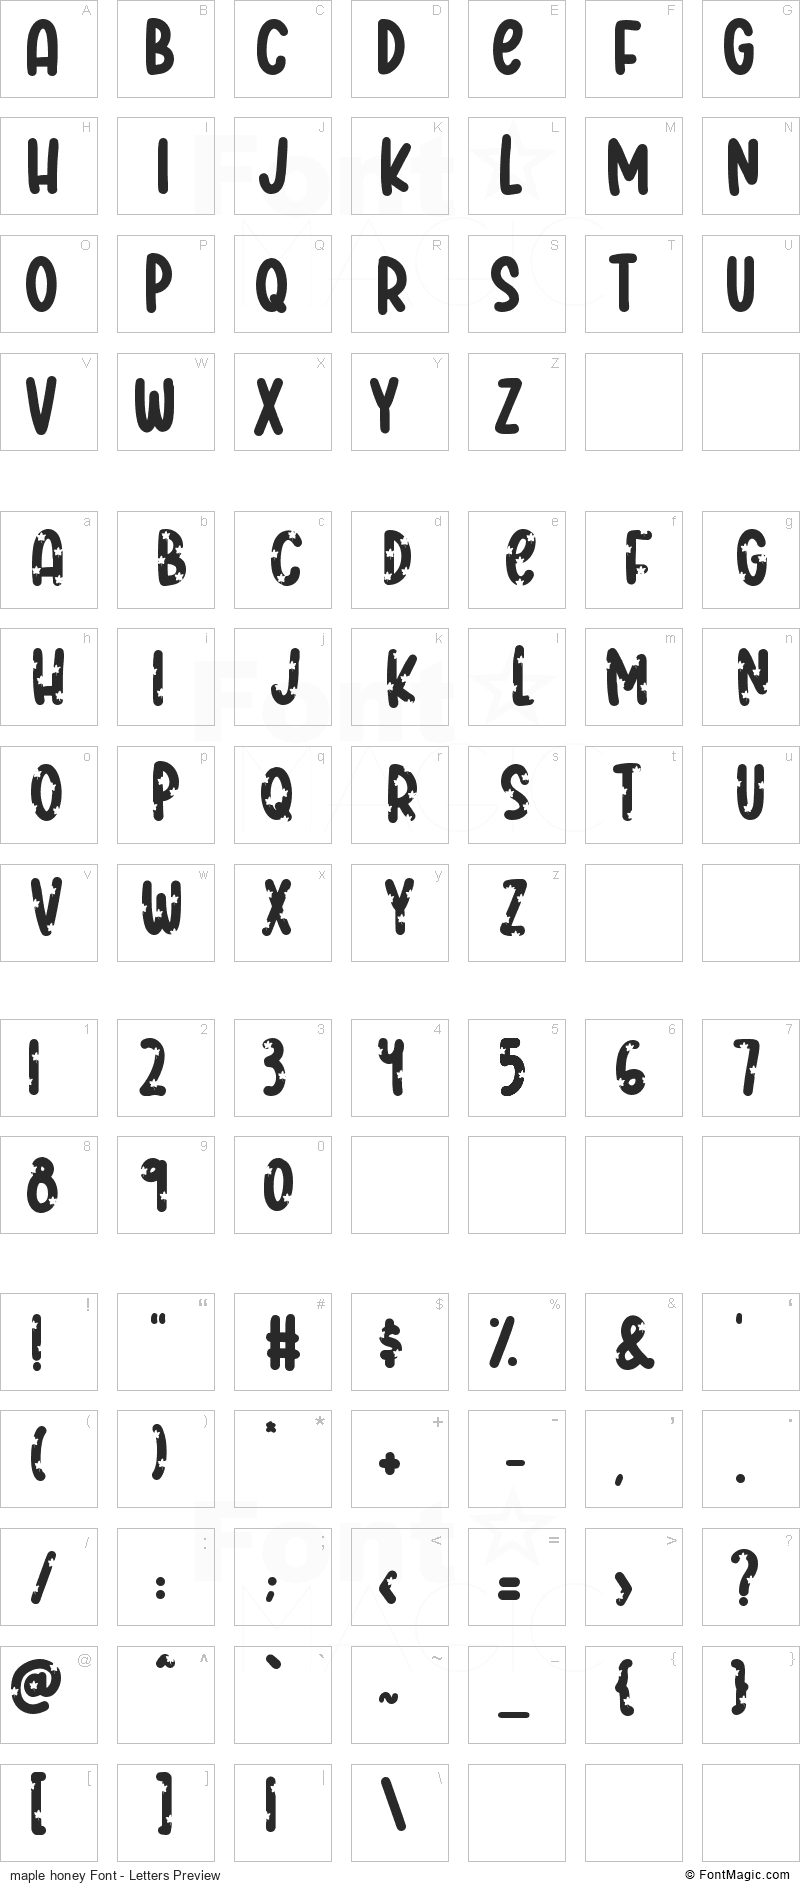 maple honey Font - All Latters Preview Chart